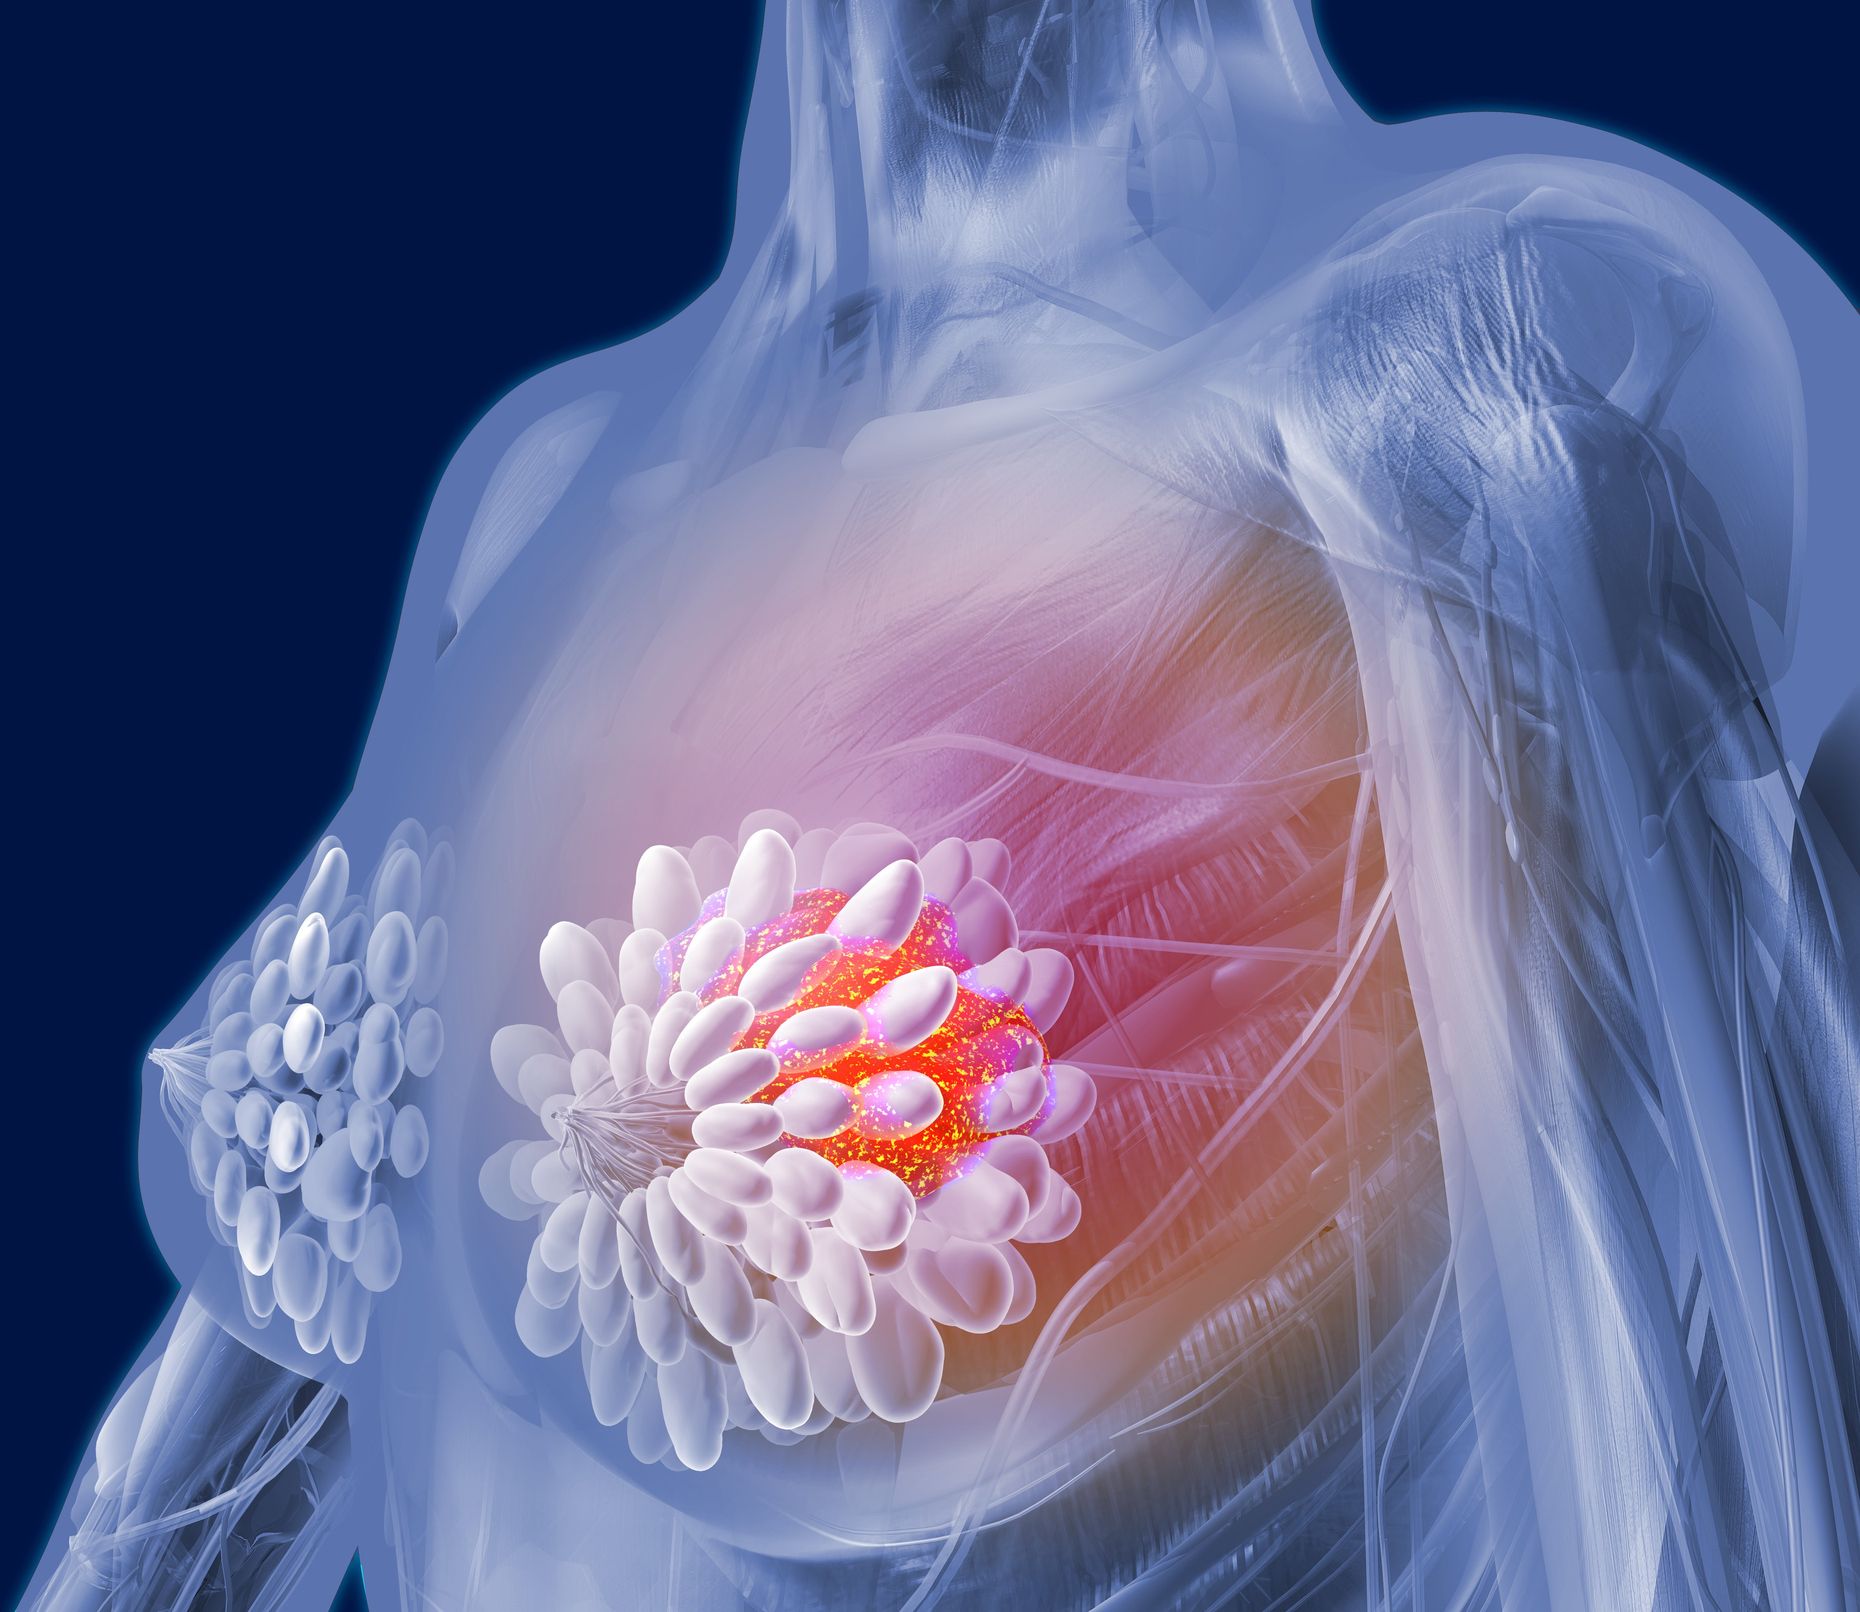 10 Ways to Prevent Breast Cancer - Breast Cancer Prevention Tips